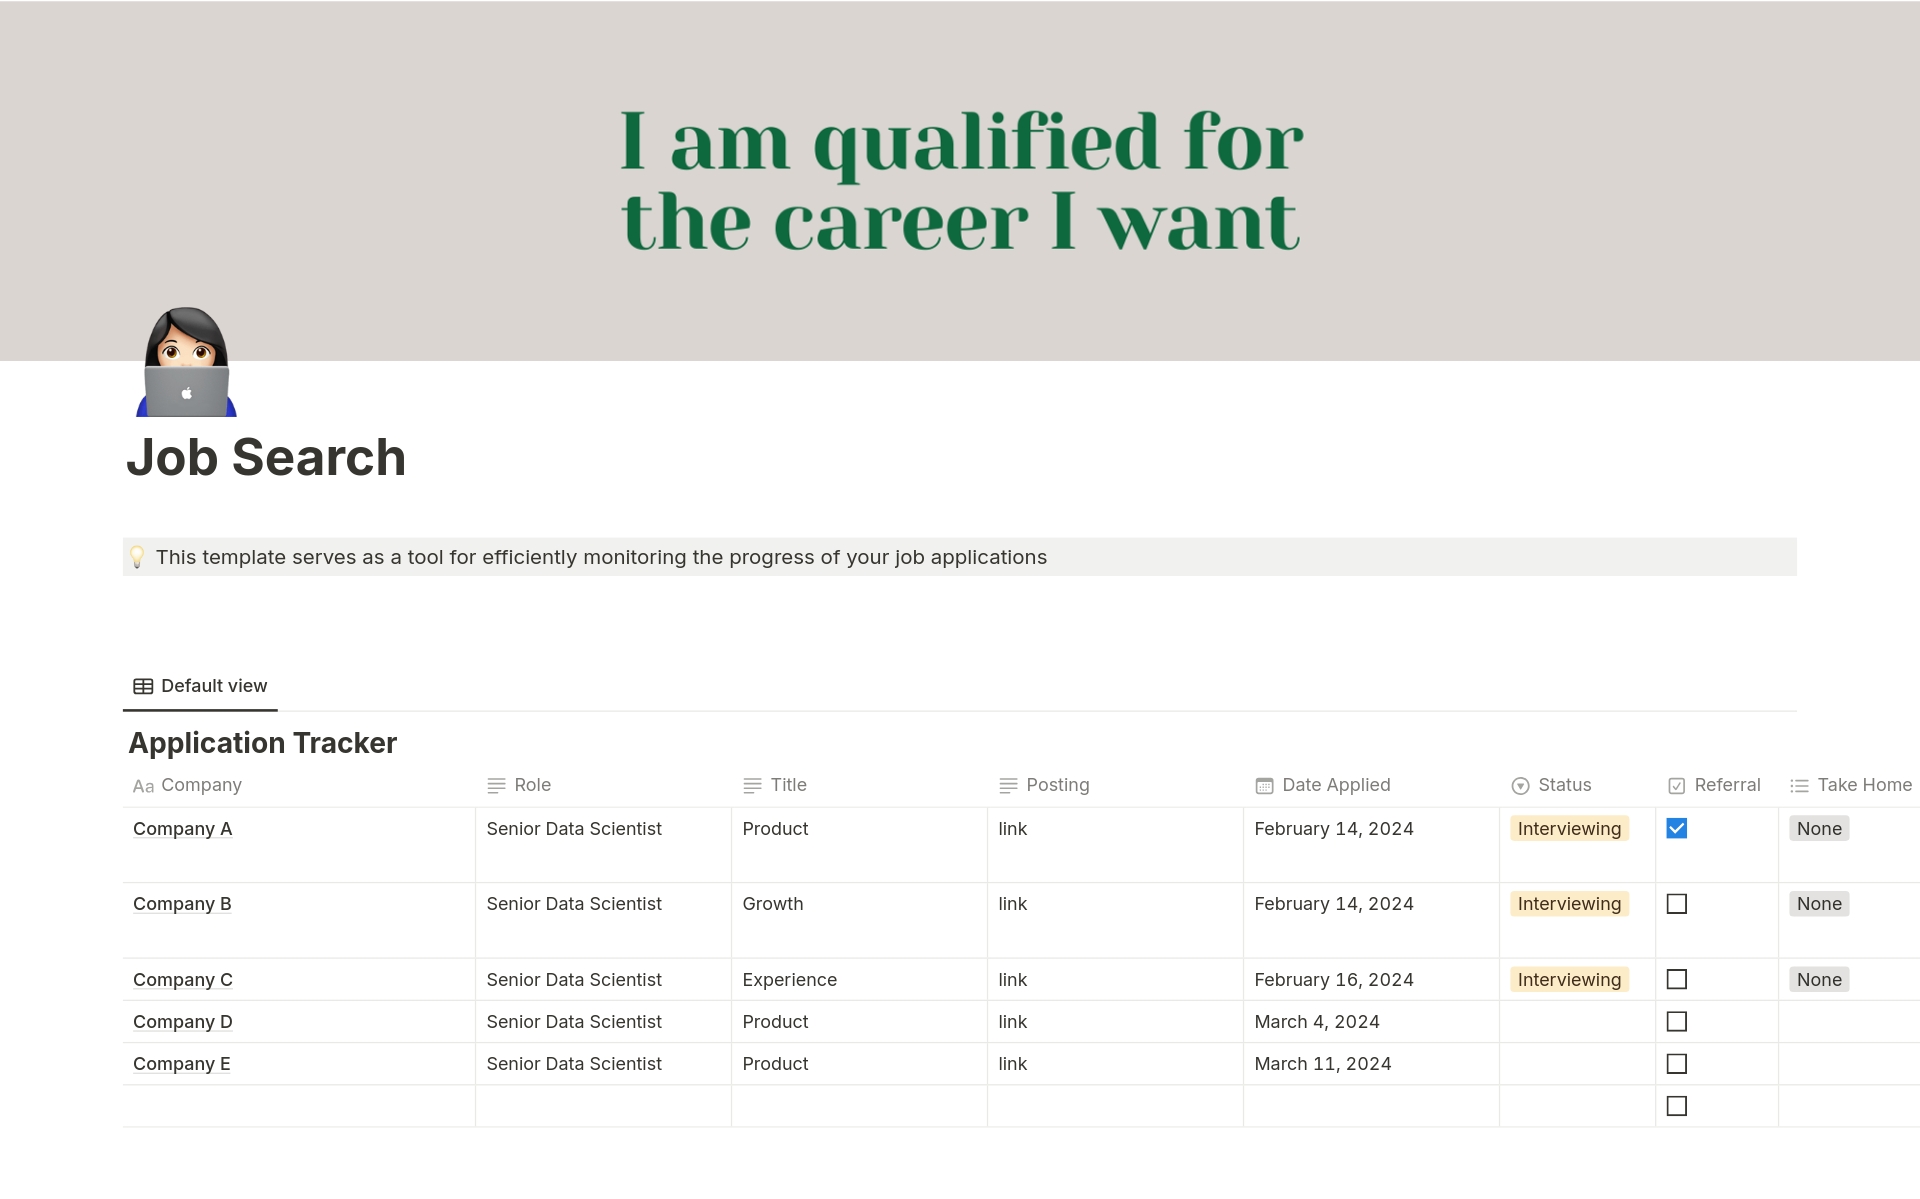 This template serves as a tool for efficiently monitoring the progress of your job applications